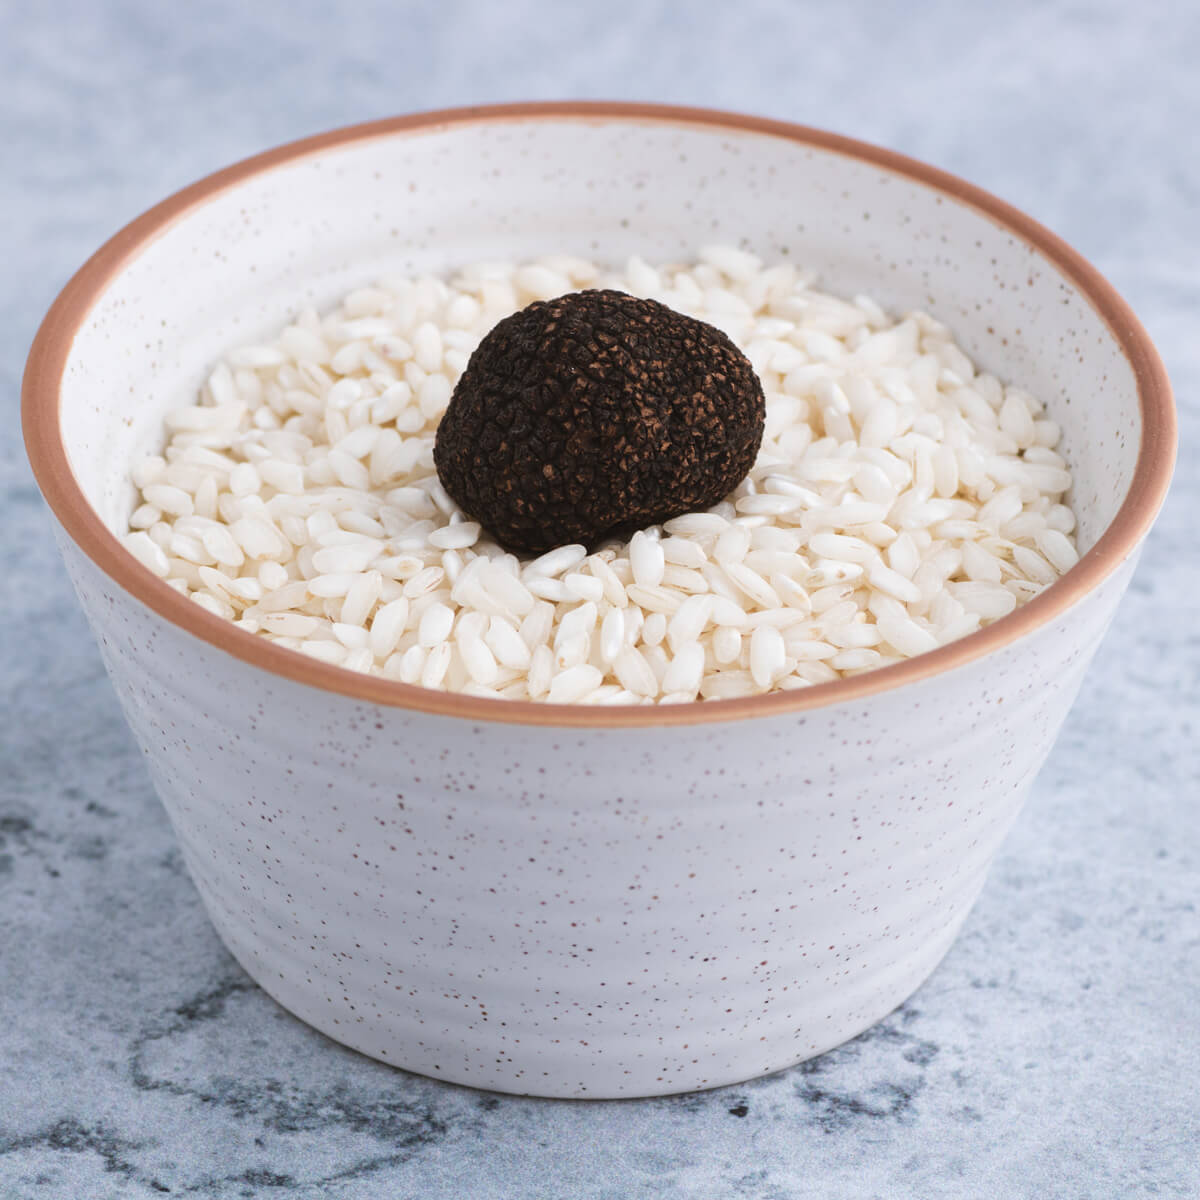 A small bowl containing arborio rice and a small winter truffle.